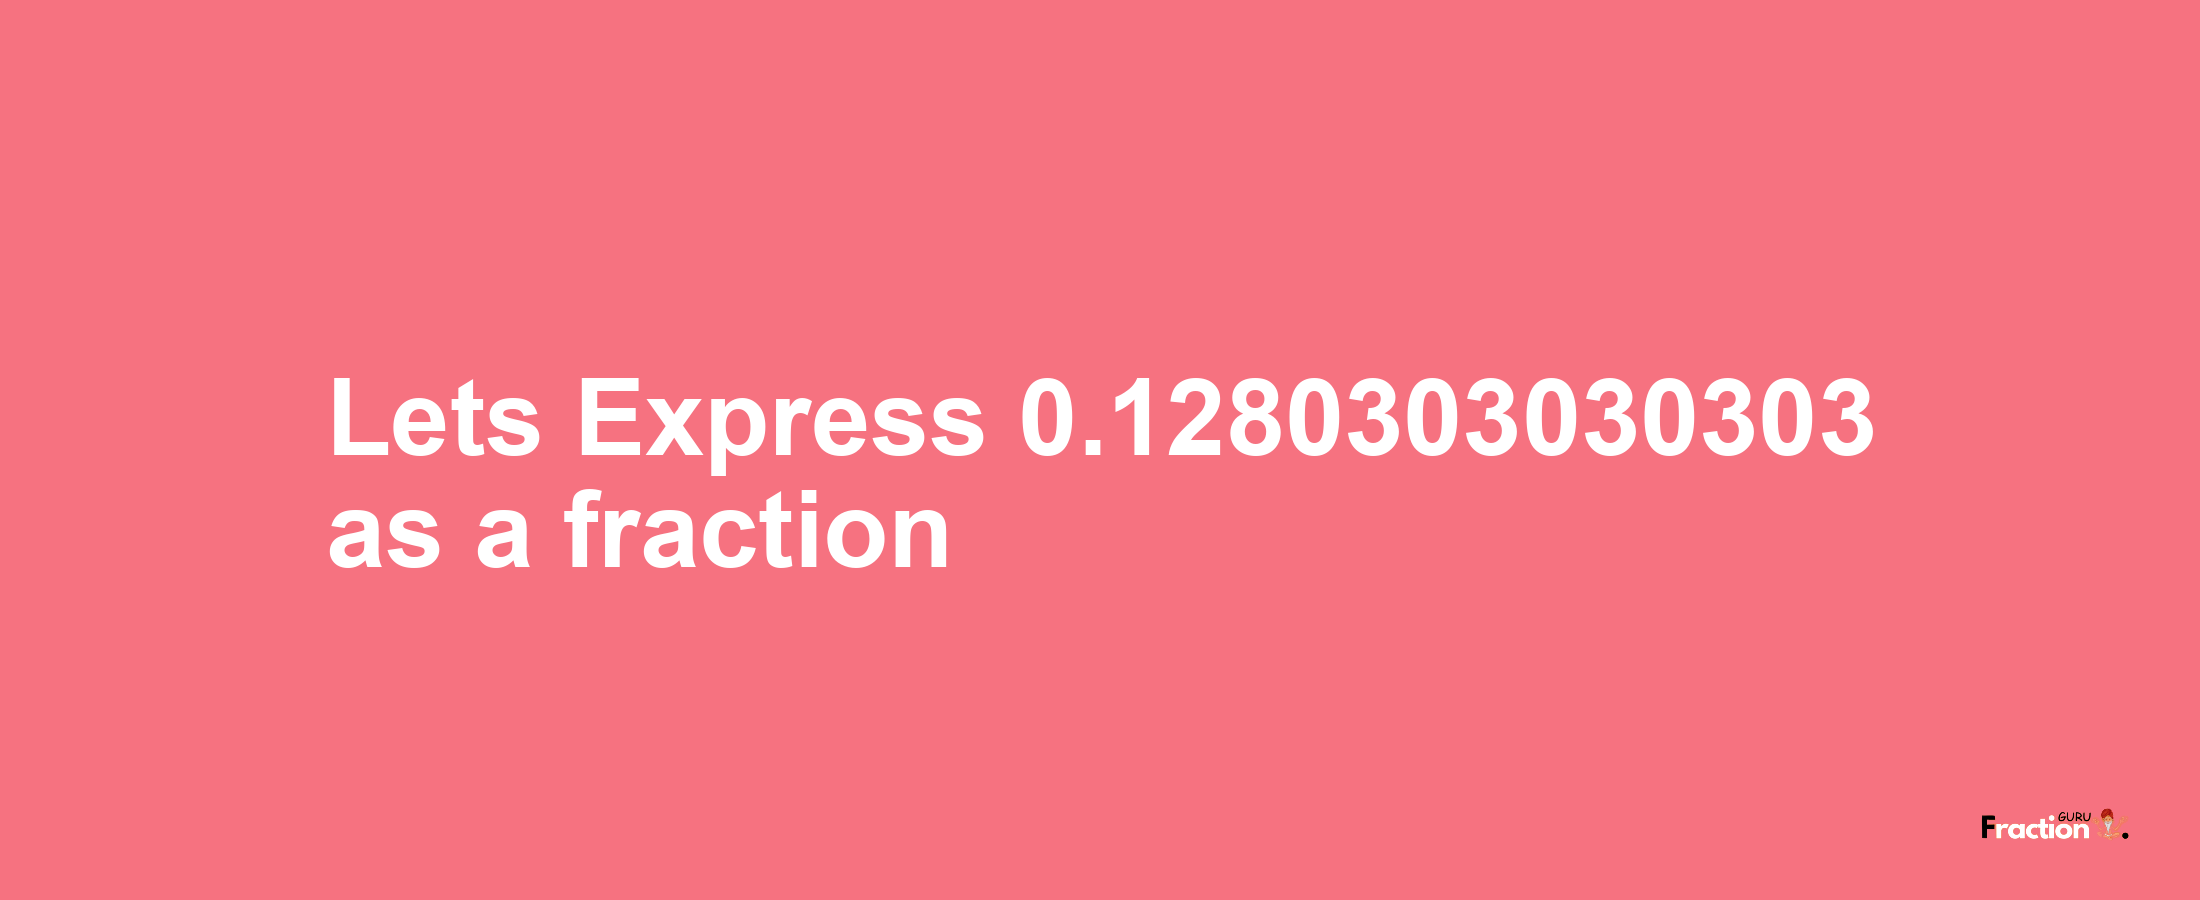 Lets Express 0.1280303030303 as afraction